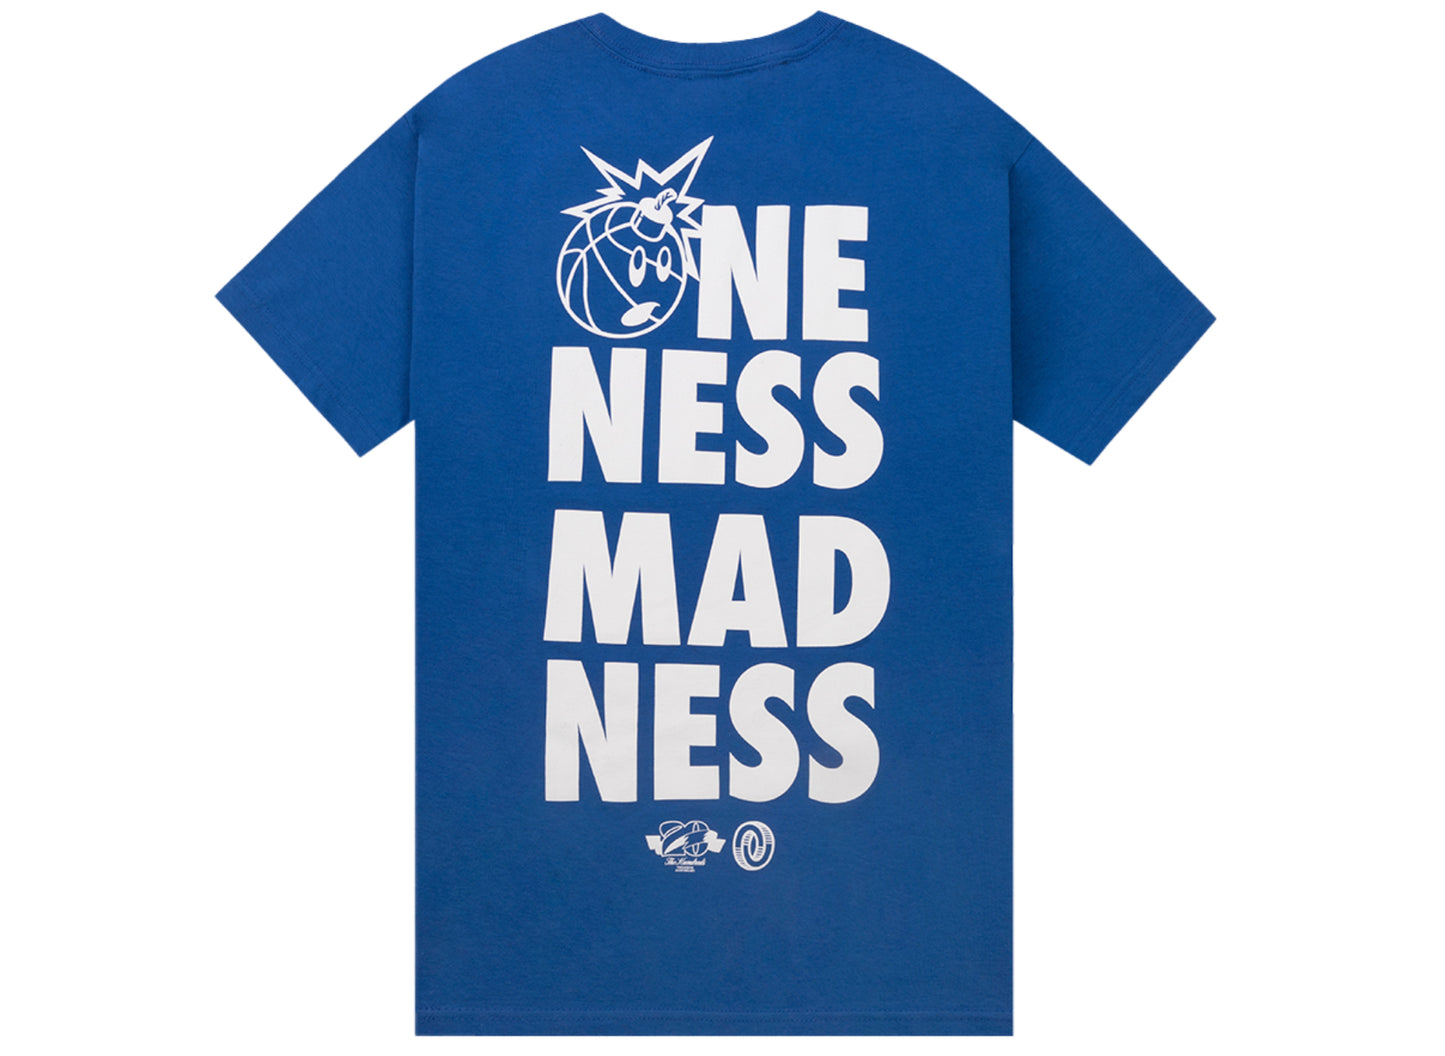 The Hundreds Oneness Madness Tee in Royal Blue